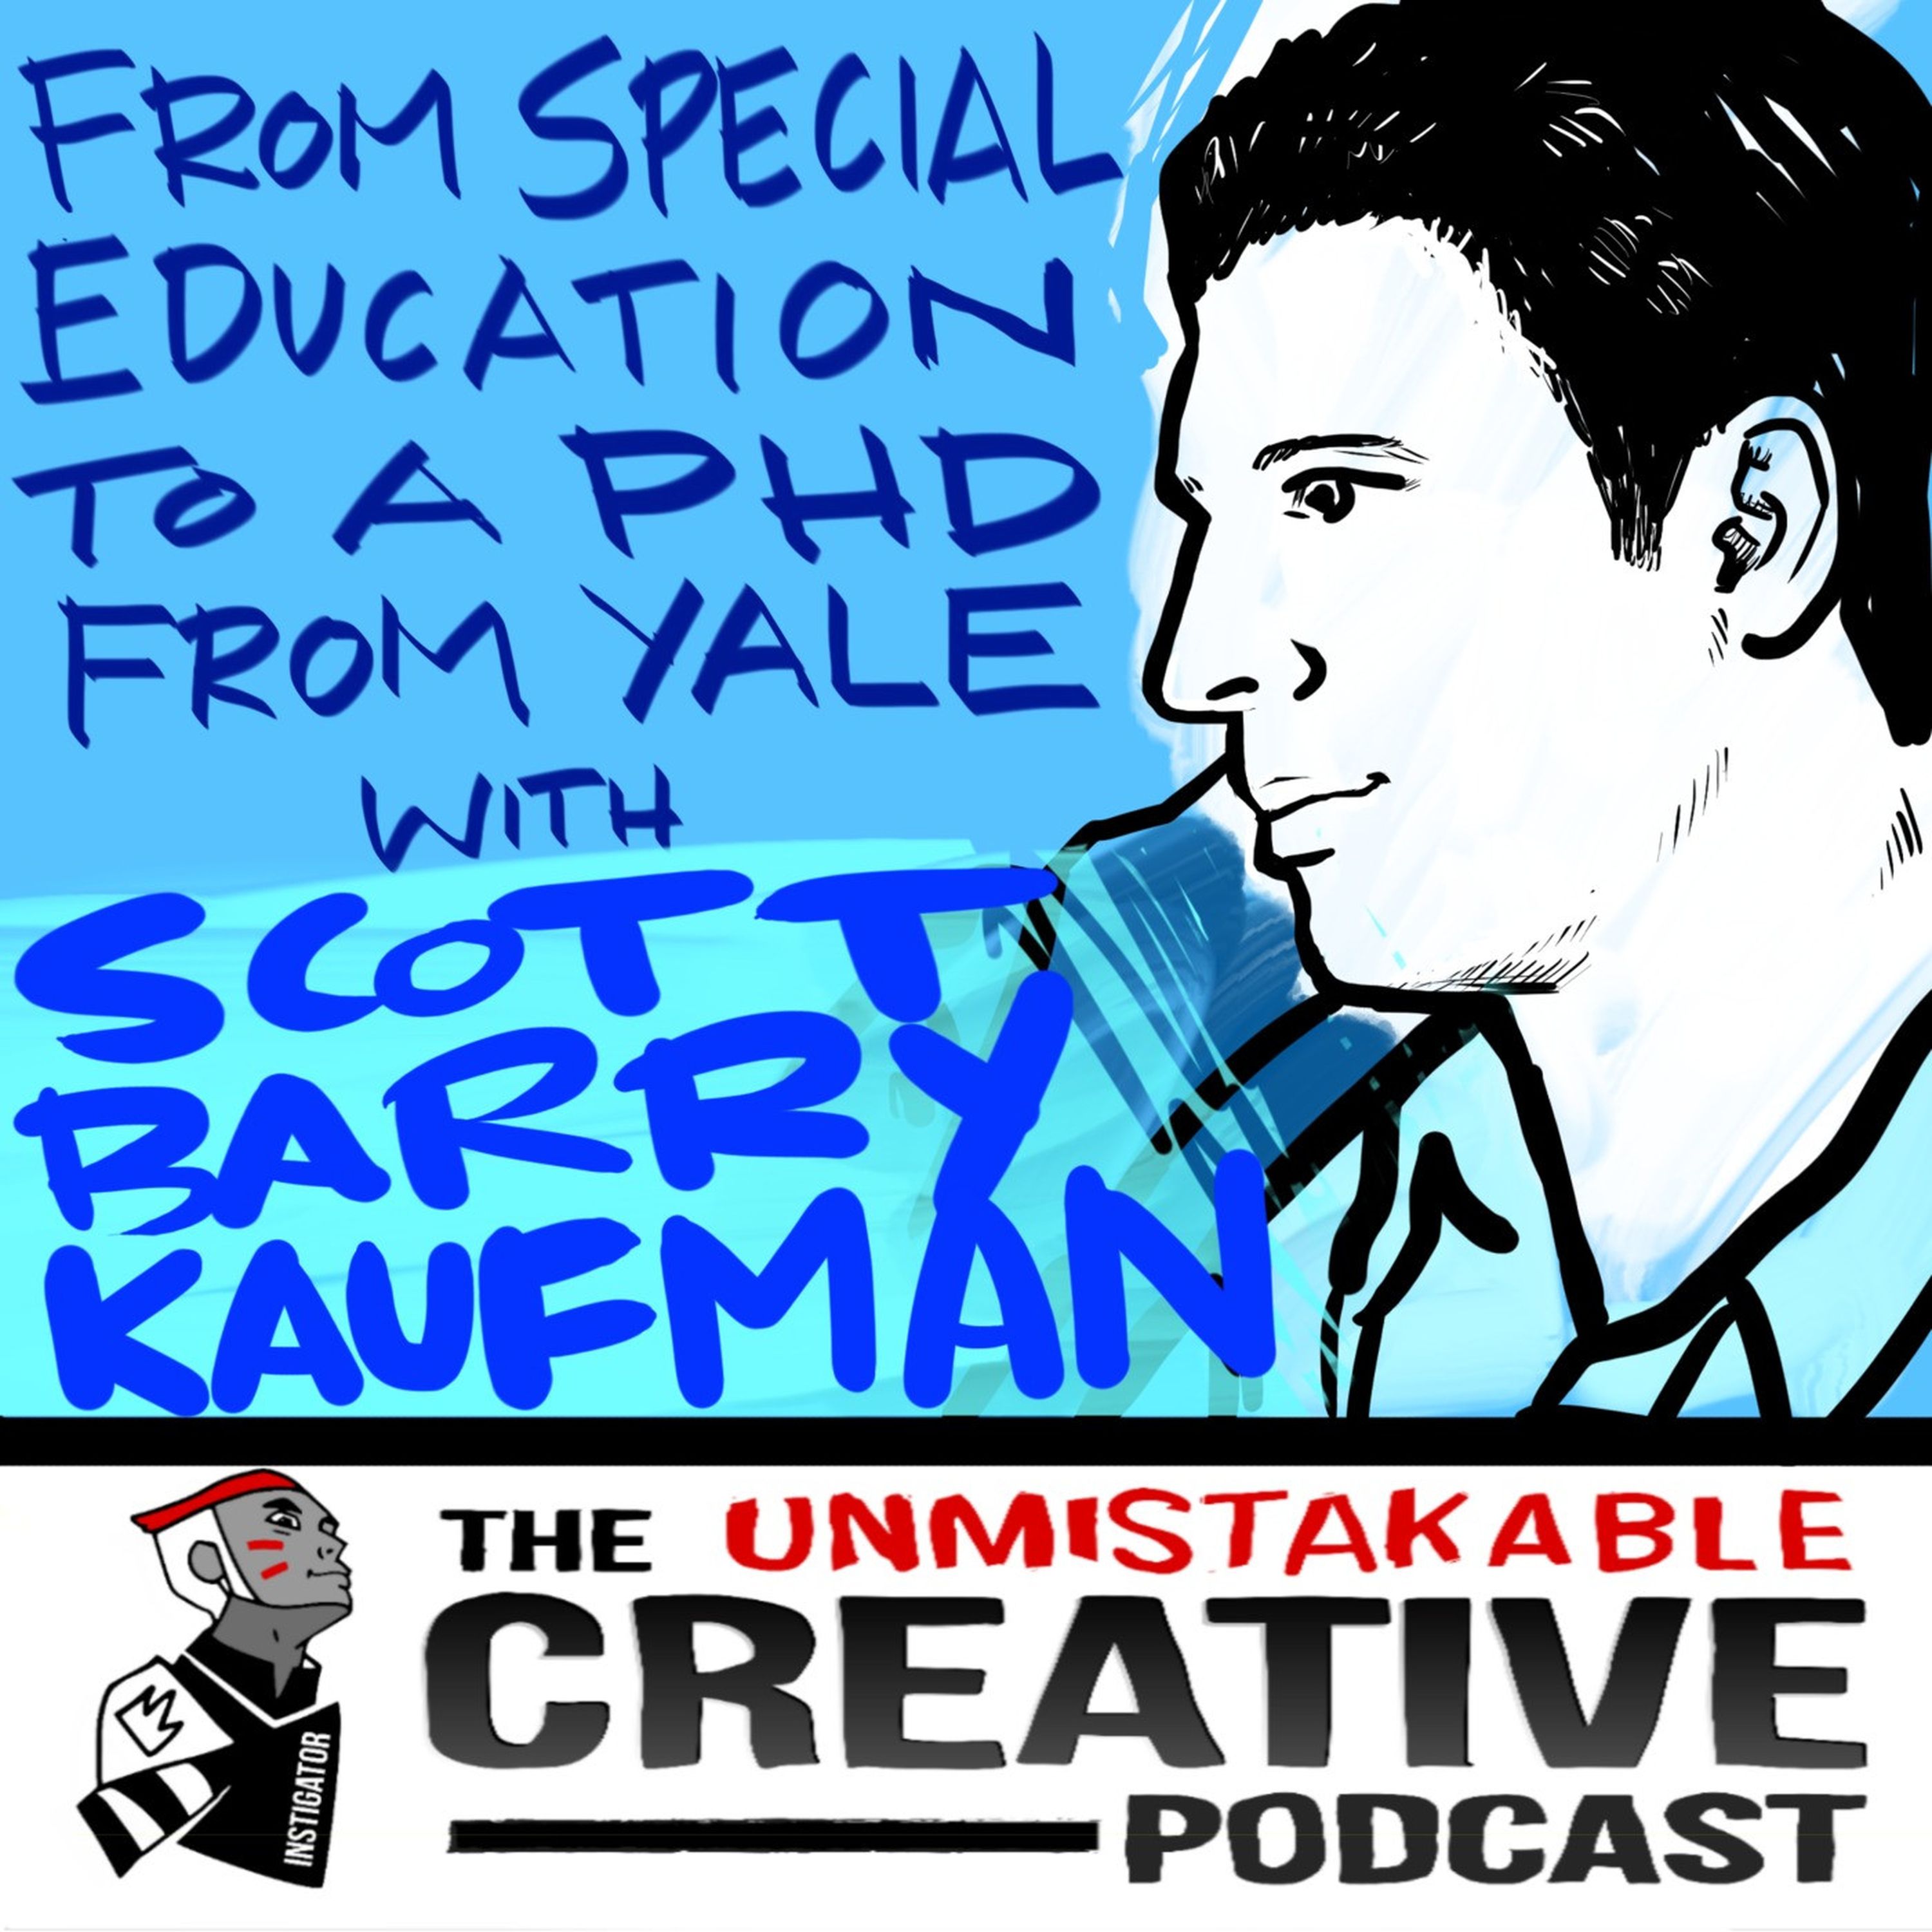 From Special Education to a PHD at Yale with Scott Barry Kaufman